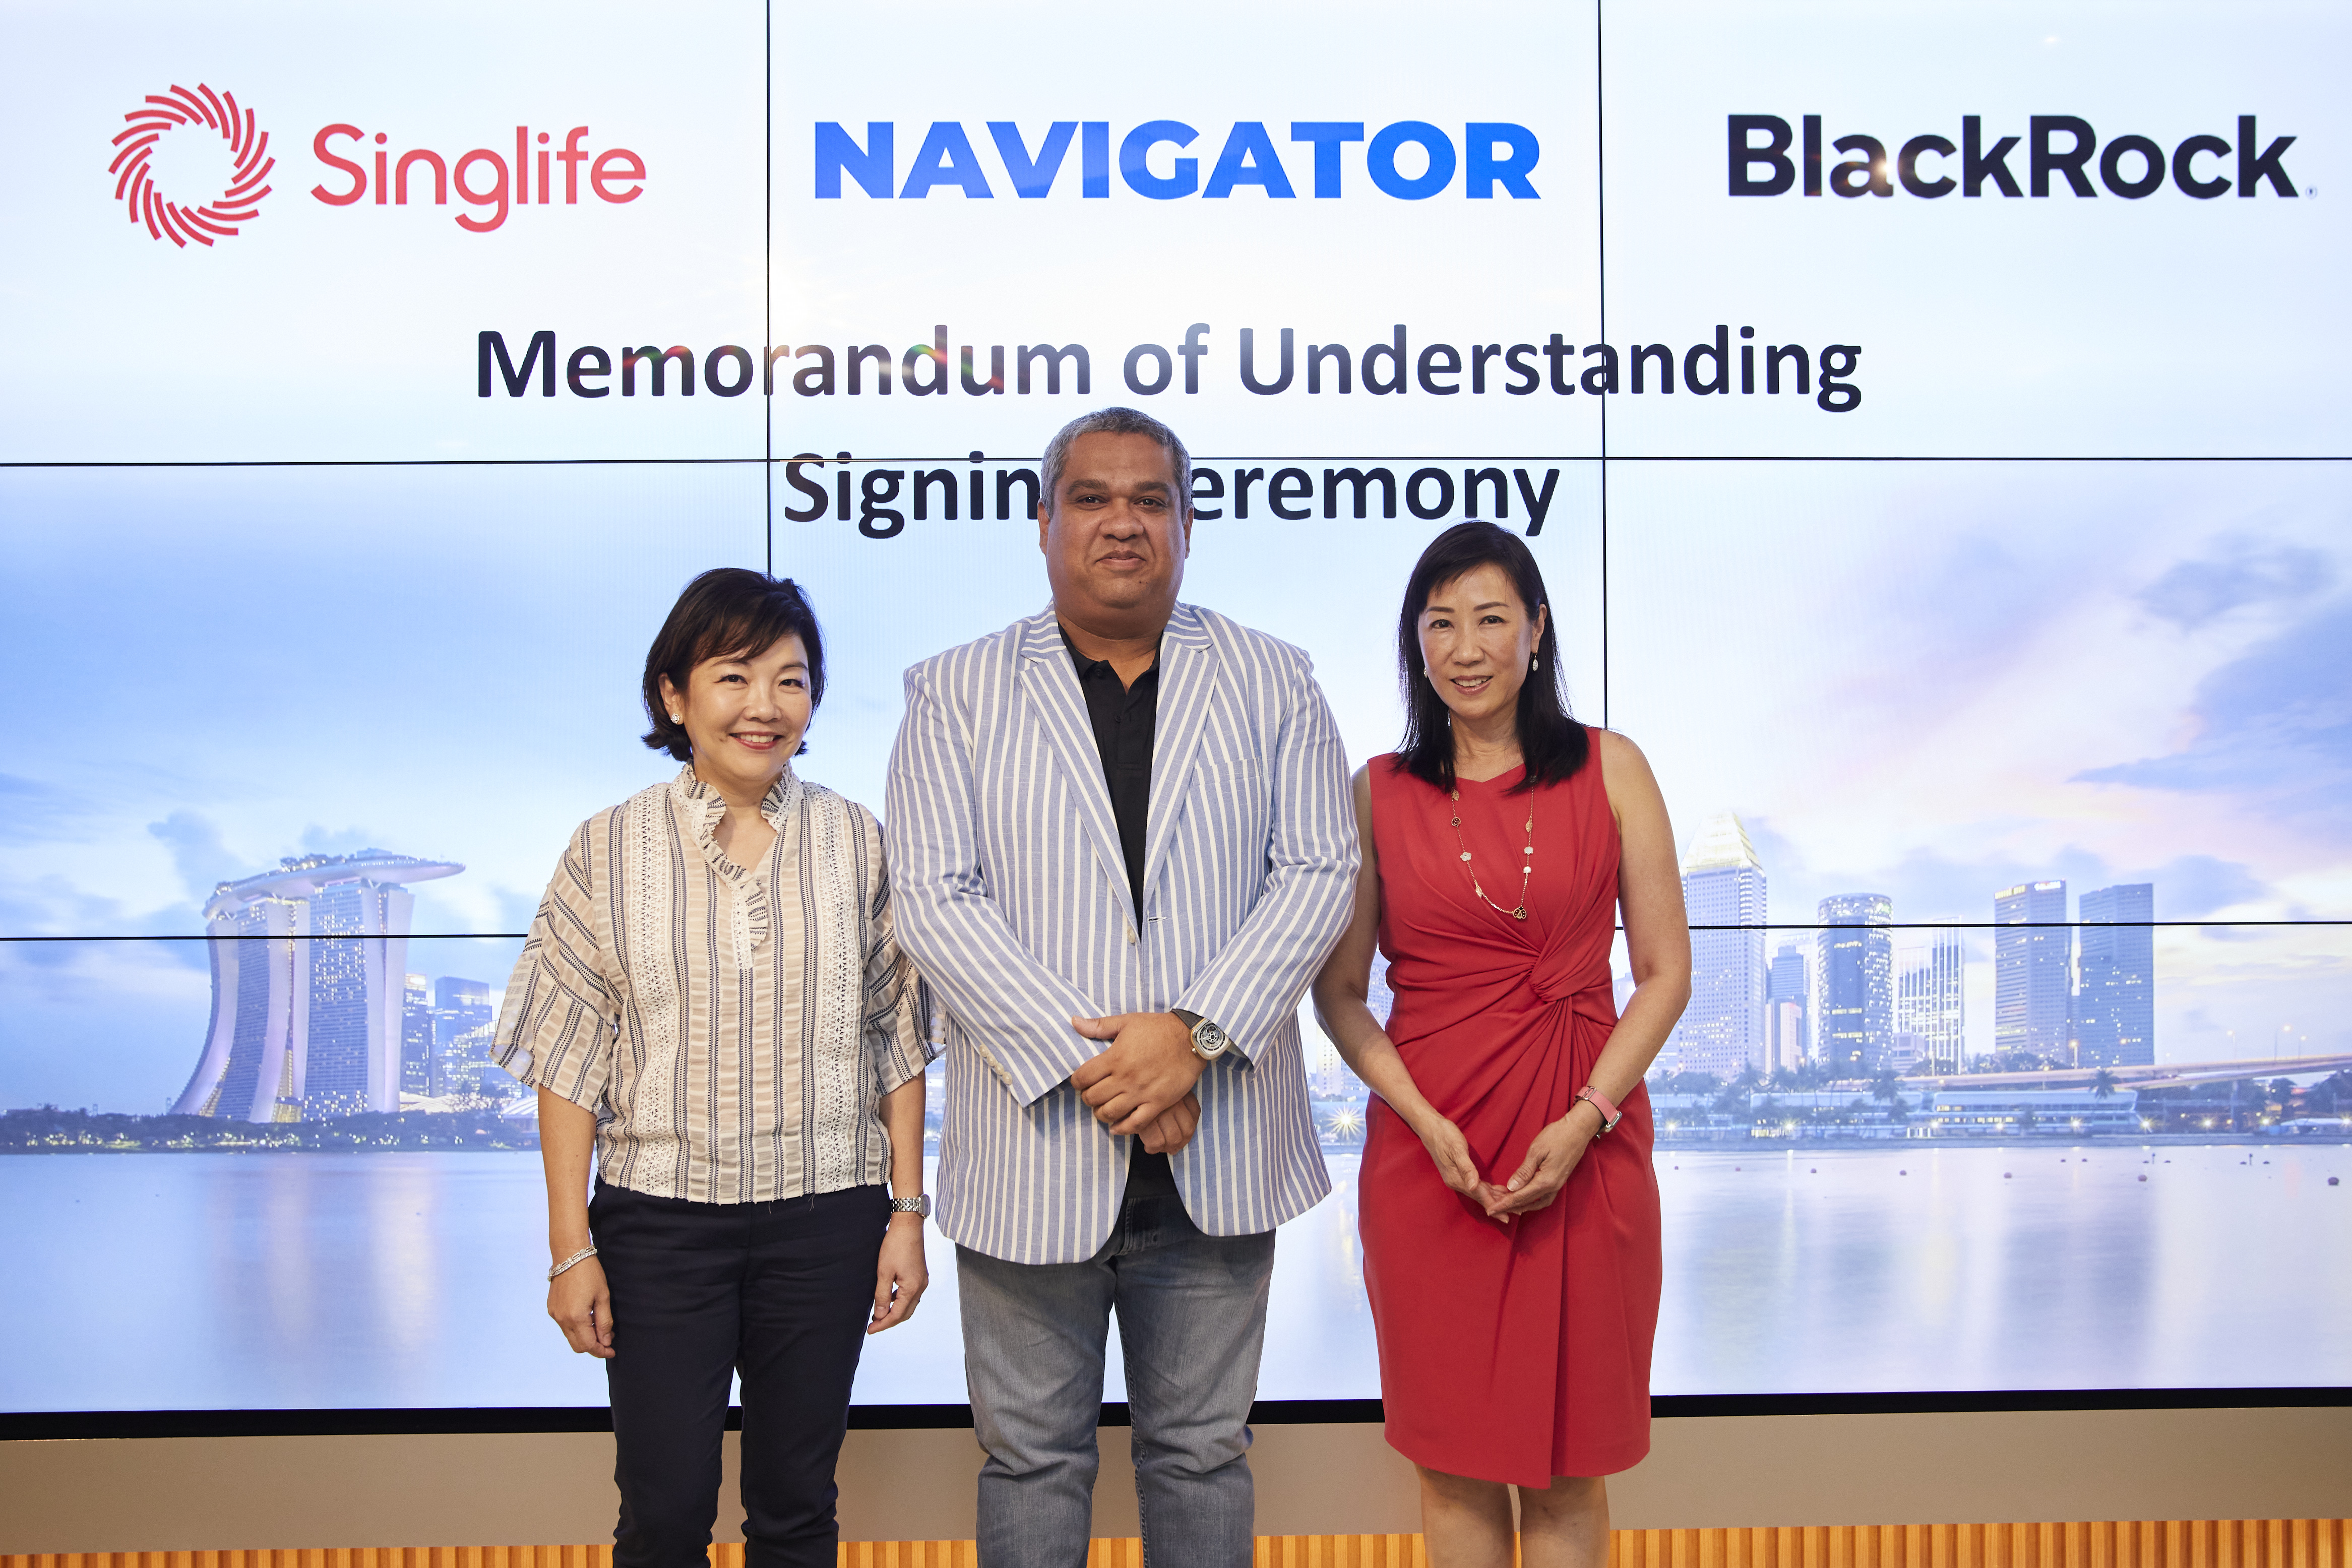 From Left: Pearlyn Phau, Group CEO, Singlife, Akhil Doegar, CEO, Navigator Investment Services, Deborah Ho, Country Head of Singapore and Head of Southeast Asia, BlackRock